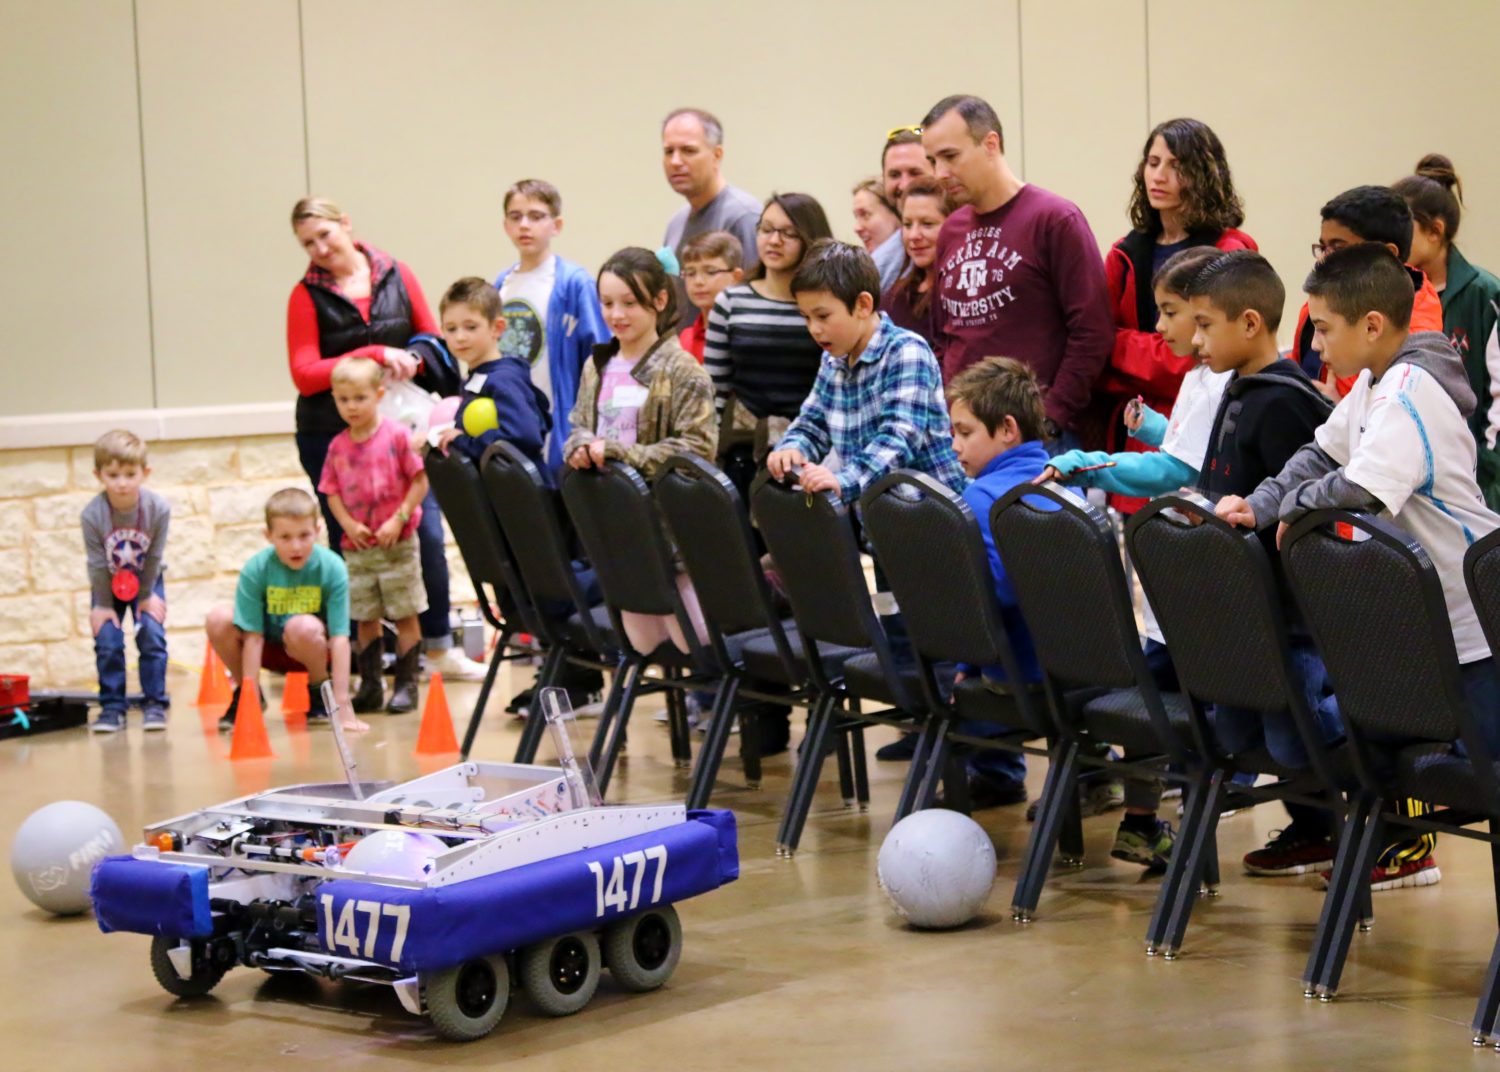 Onlookers anxiously await for a ball to be launched during a Robotics Demonstration during the Sci://Tech Exposition on Saturday.